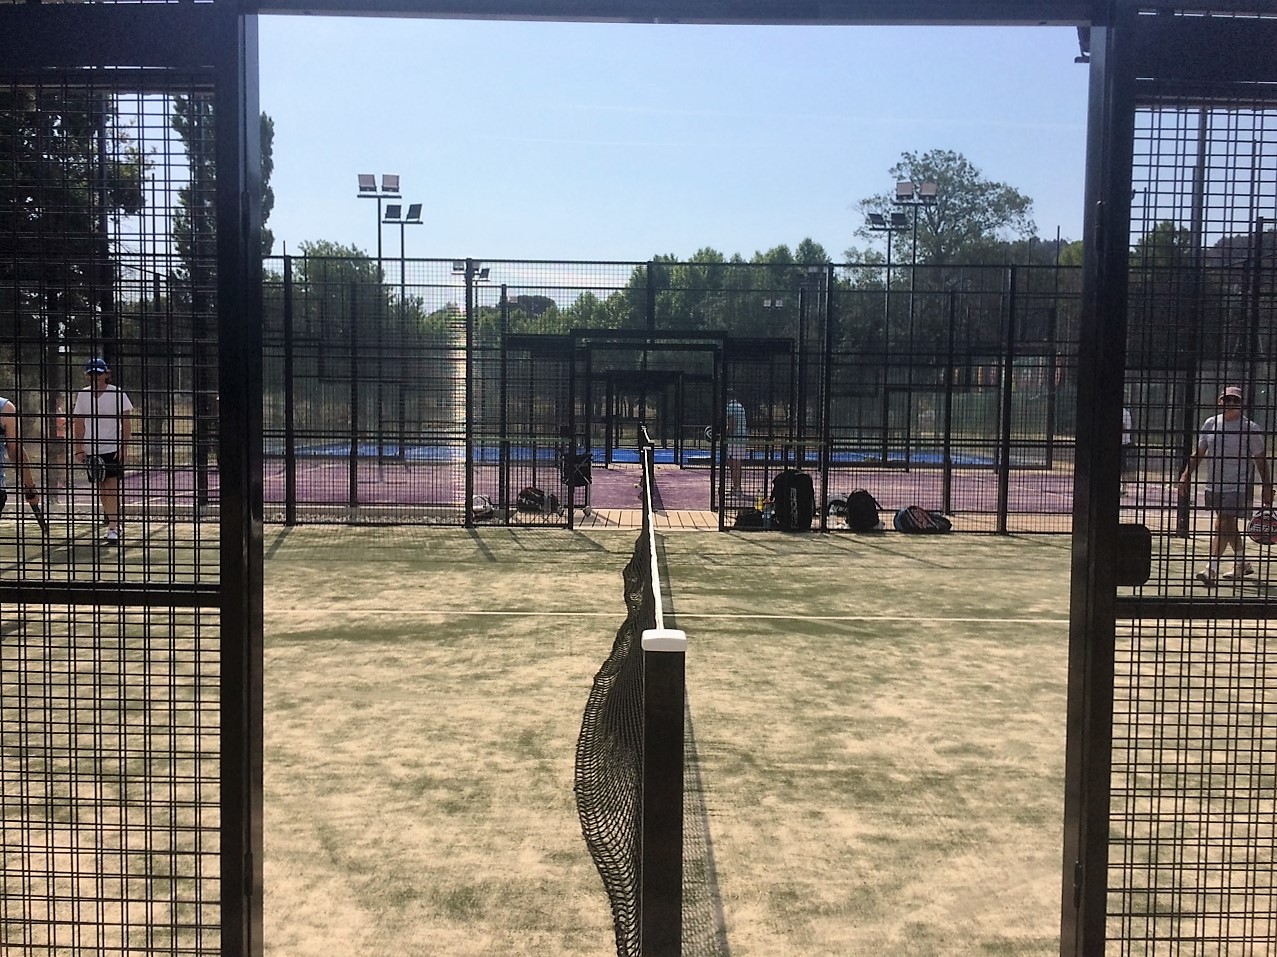 ALL IN PADEL - From the project to the club padel : what an adventure !